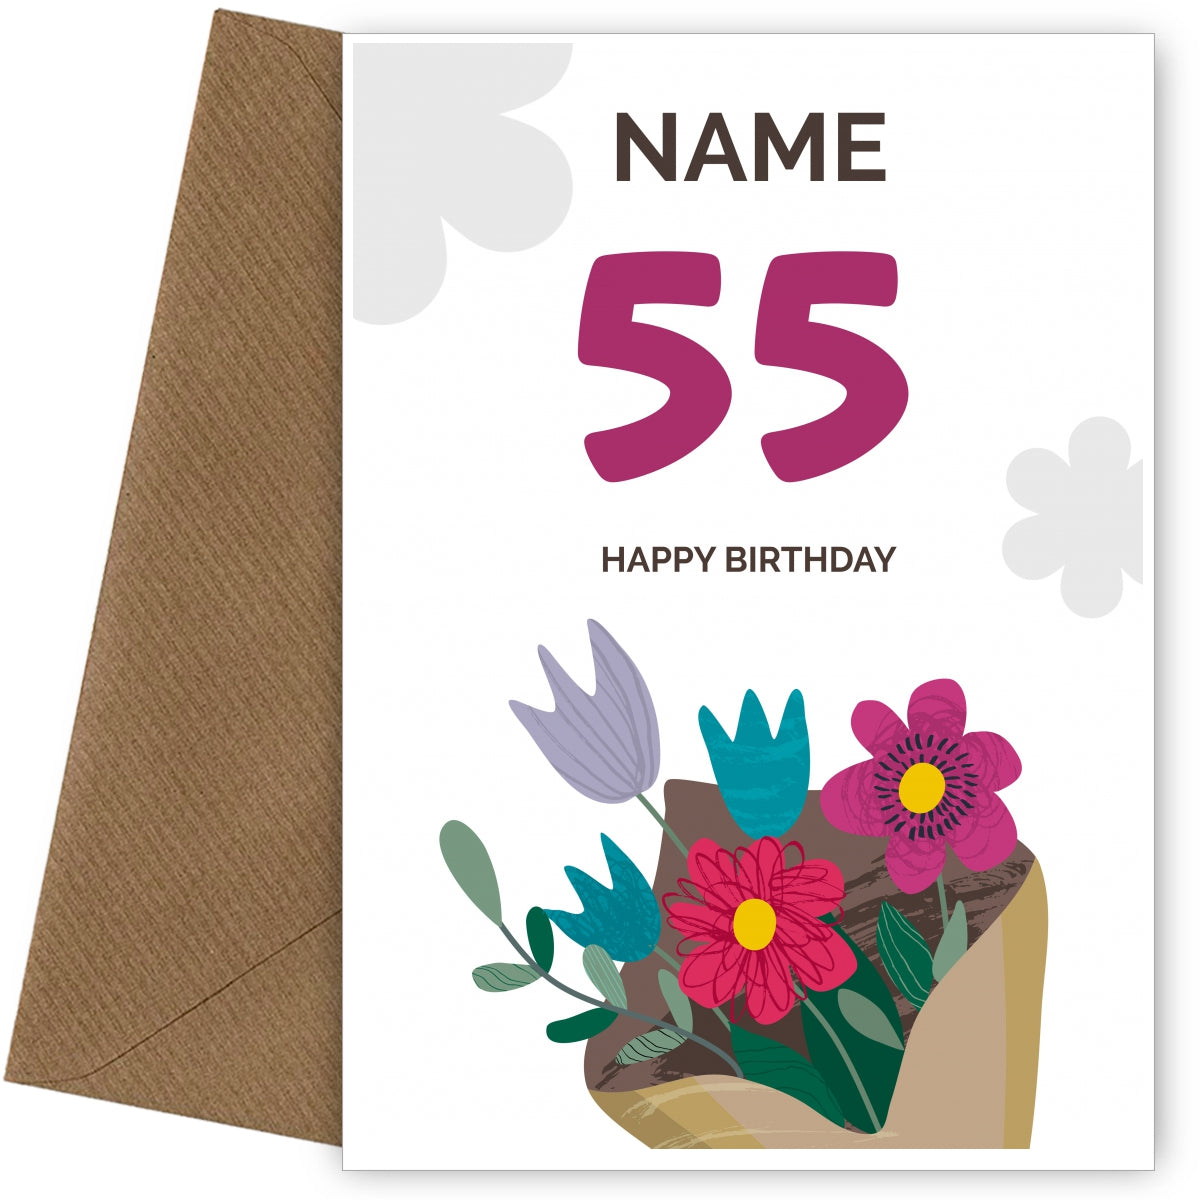 Happy 55th Birthday Card - Bouquet of Flowers